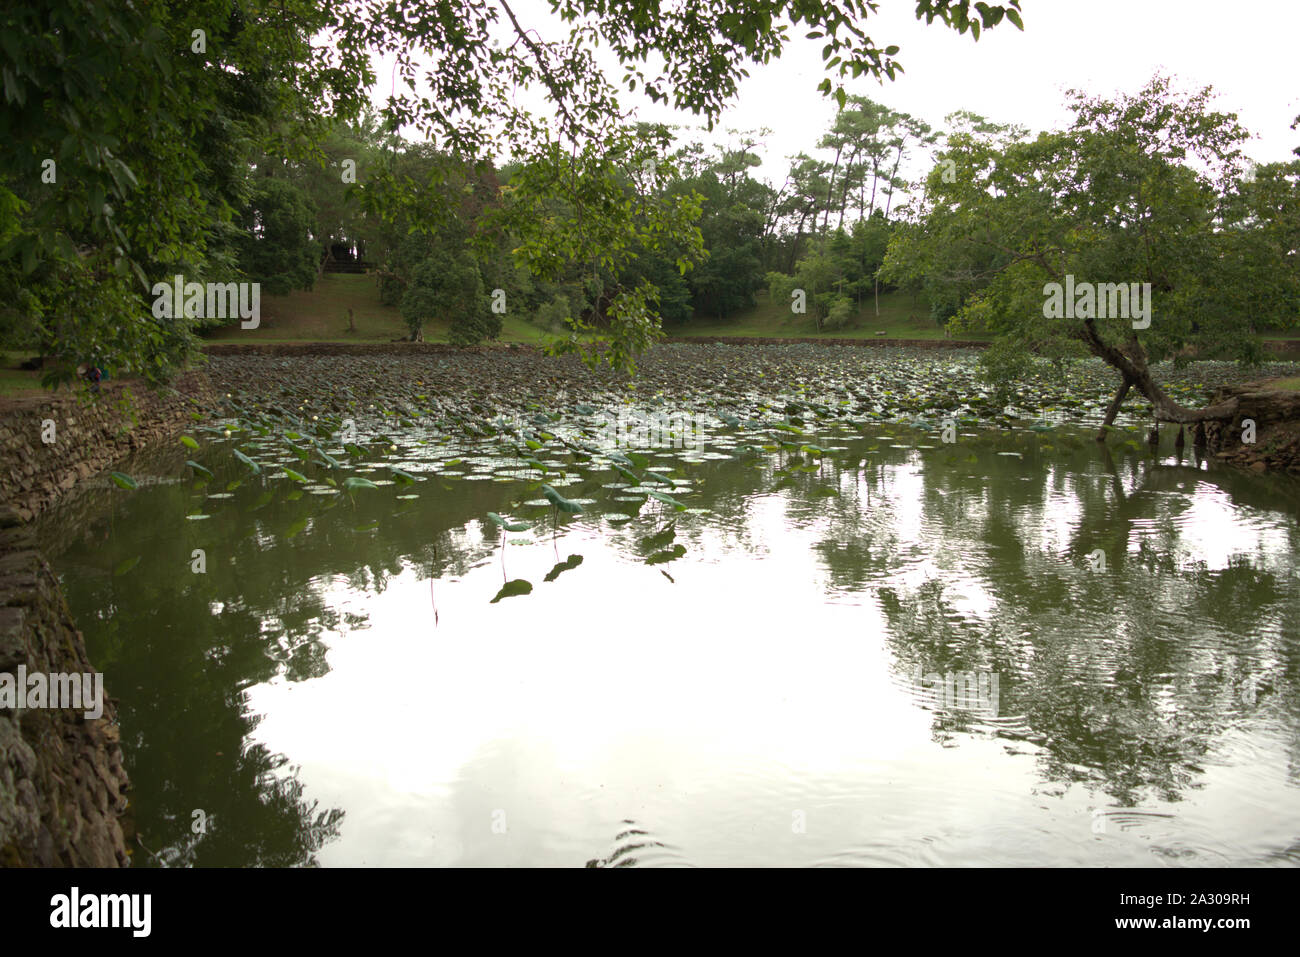 Image of a lotus pond late in the year Stock Photo